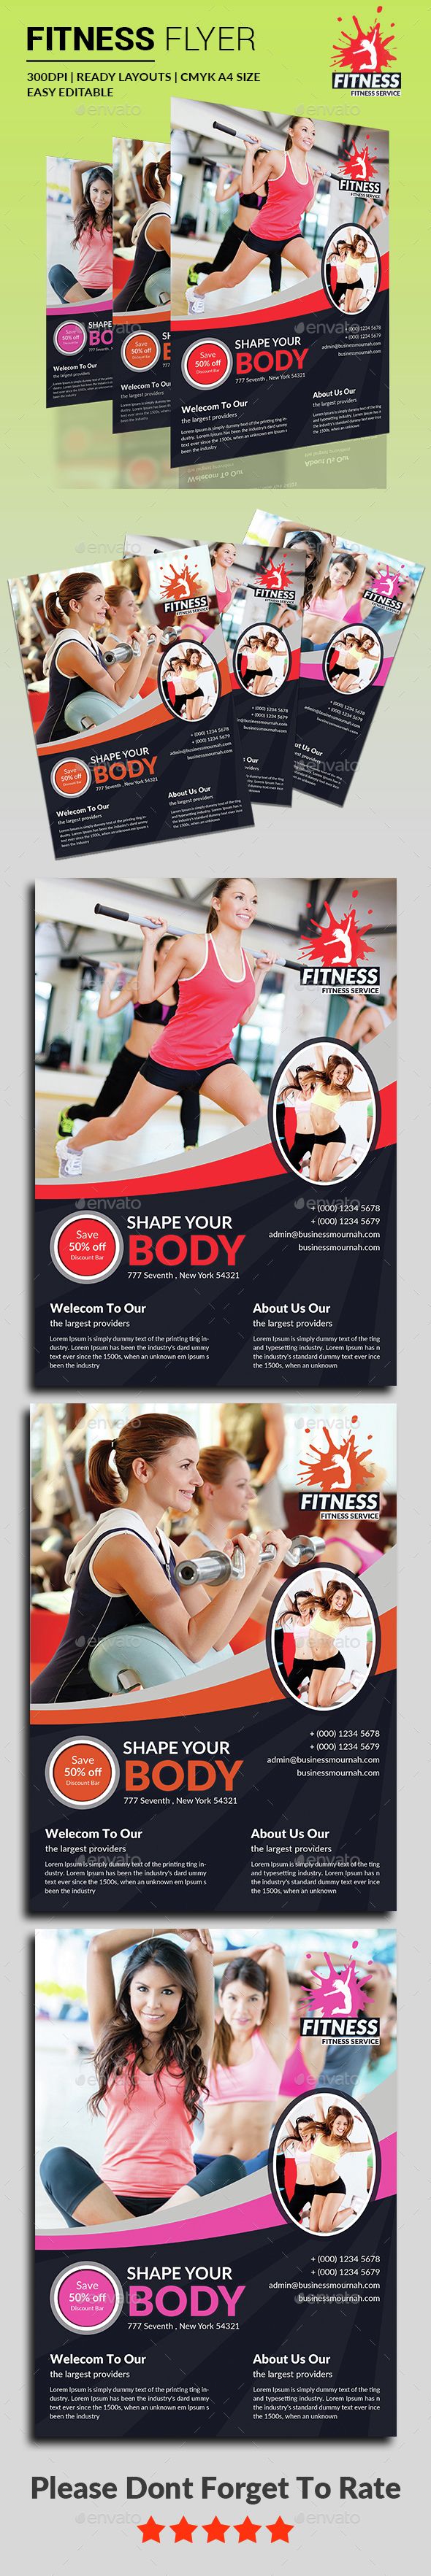 Healthcare-Advertising-Fitness-Flyer-by-afjamaal-Fitness-Flyer-.Thisflyeris-made-in-photoshop-the-files Healthcare Advertising : Fitness Flyer by afjamaal Fitness Flyer .Thisflyeris made in photoshop the files...